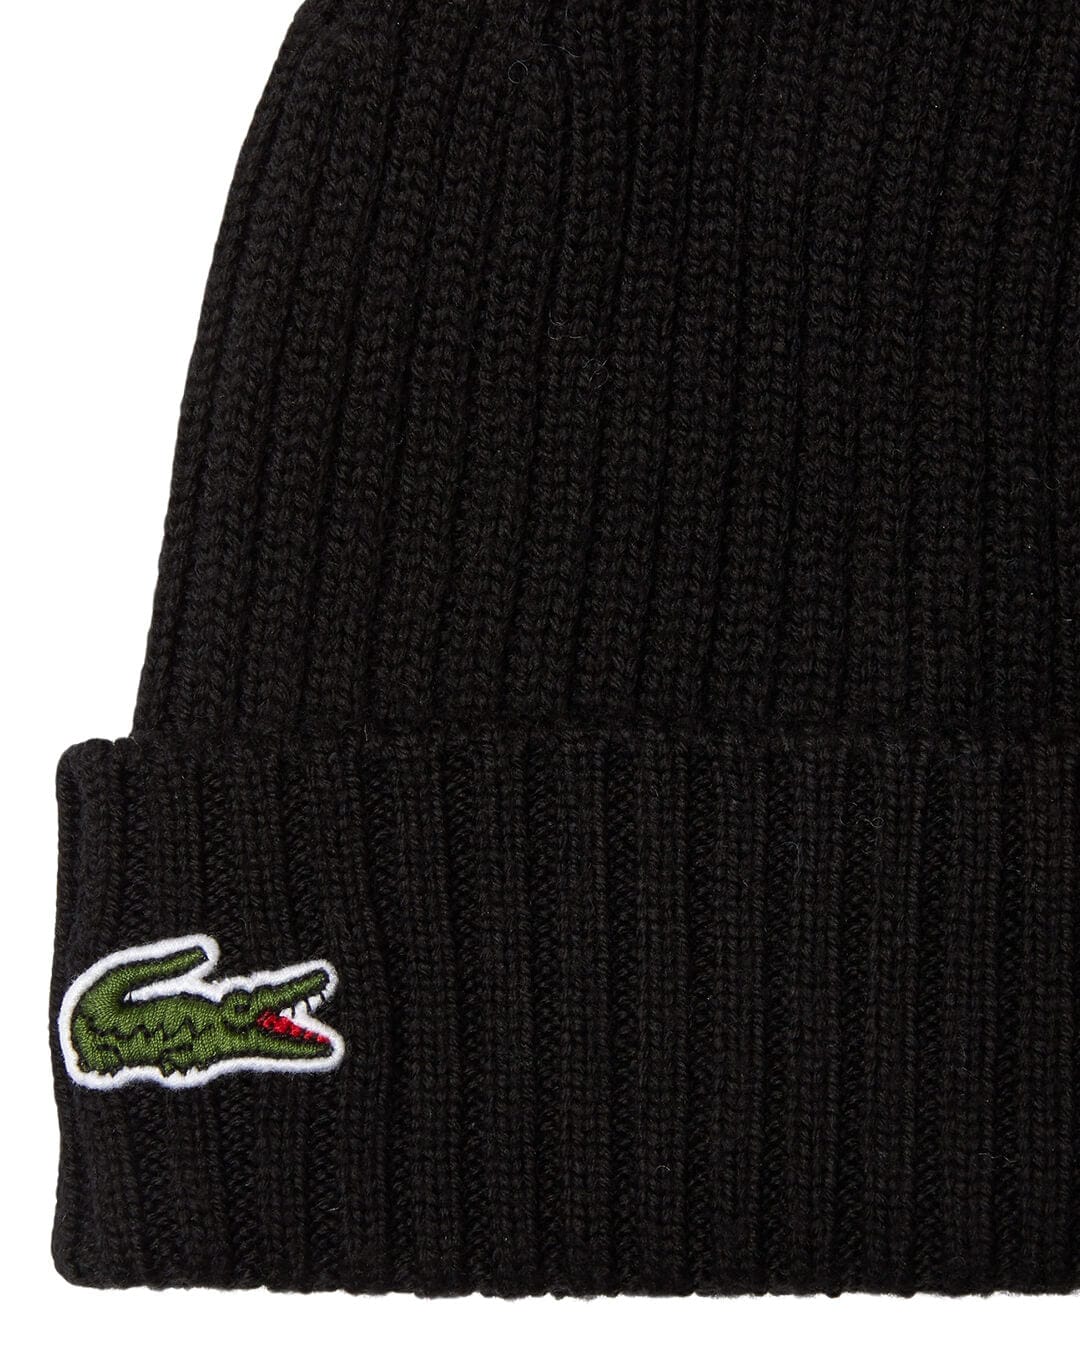 Lacoste Beanies ONE SIZE Lacoste Unisex Ribbed Wool Black Beanie